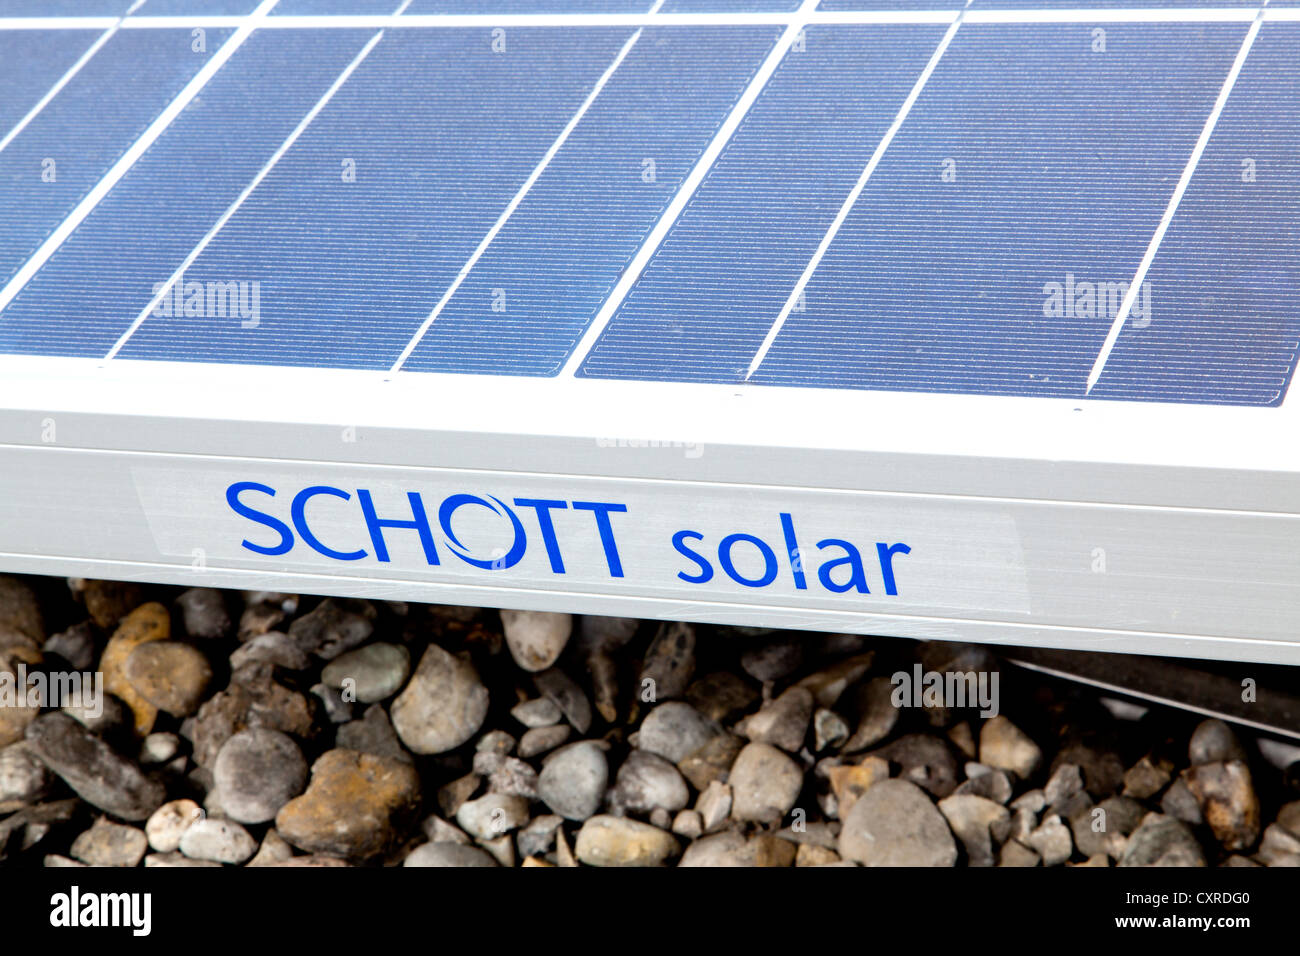 Solar panels, photovoltaic modules on a roof, produced by Schott Solar AG, lettering, Regensburg, Bavaria, Germany, Europe Stock Photo